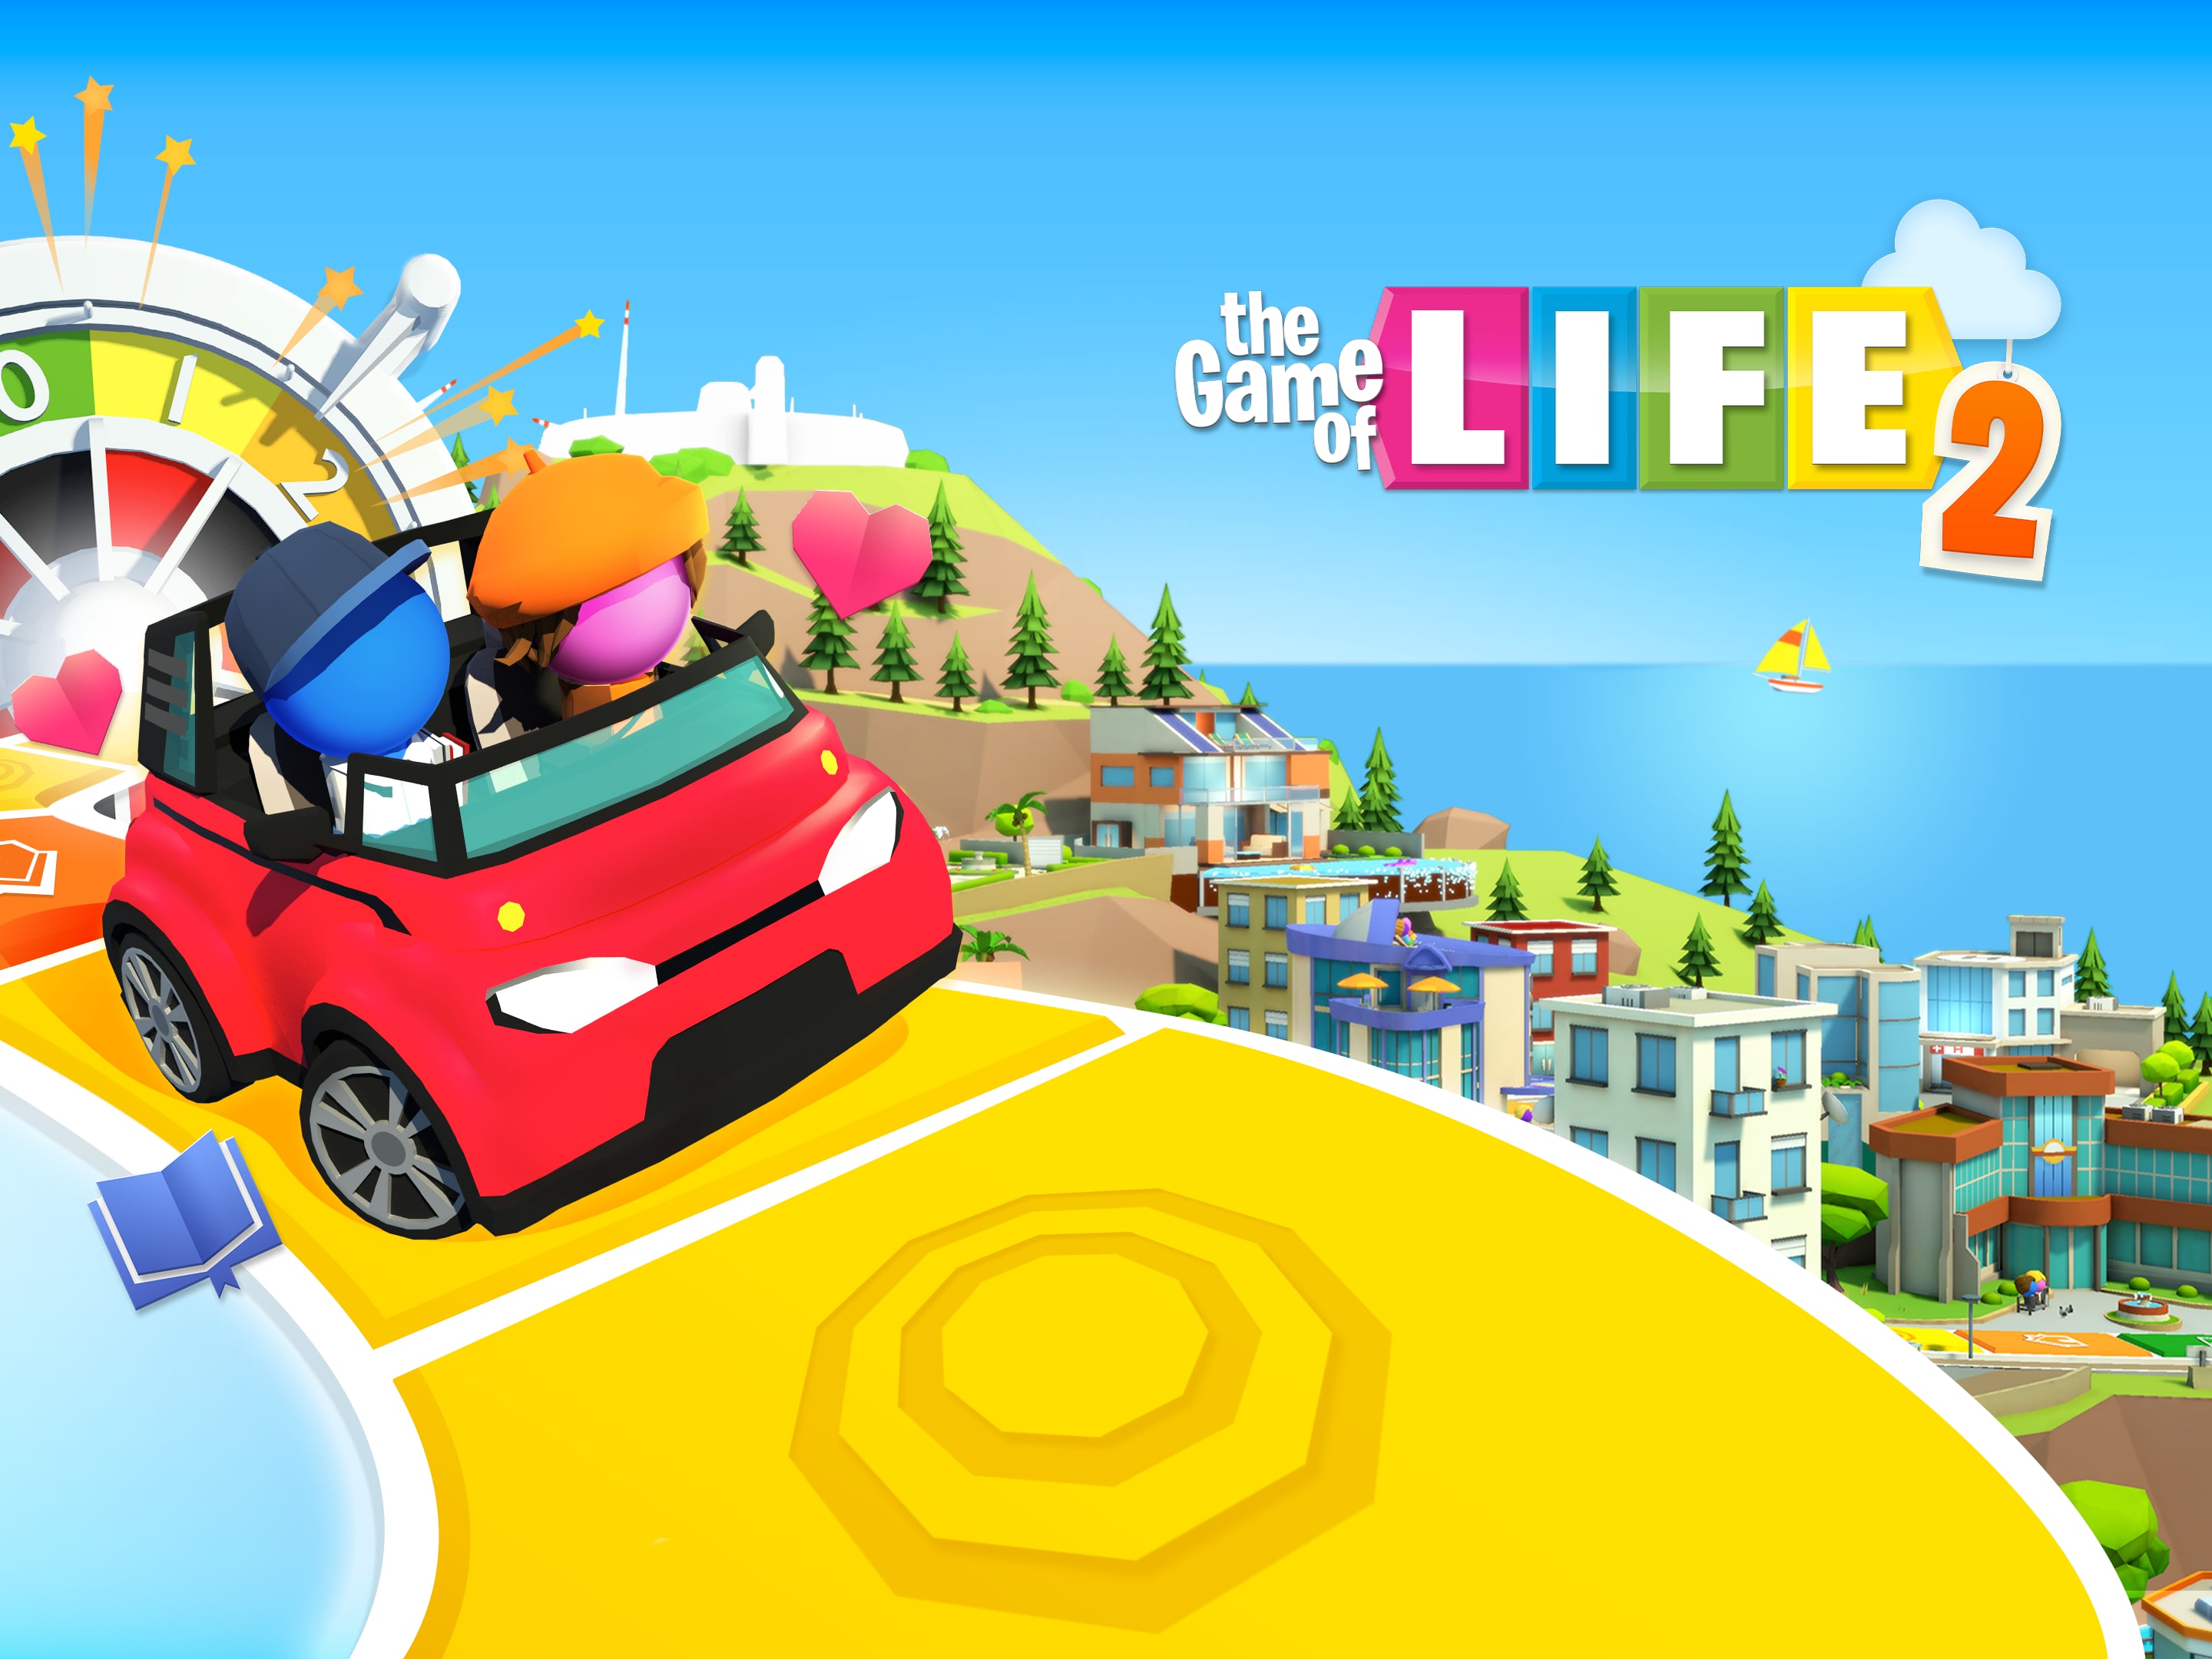 THE GAME OF LIFE 2 [Online Multiplayer] : Versus Mode ~ Classic